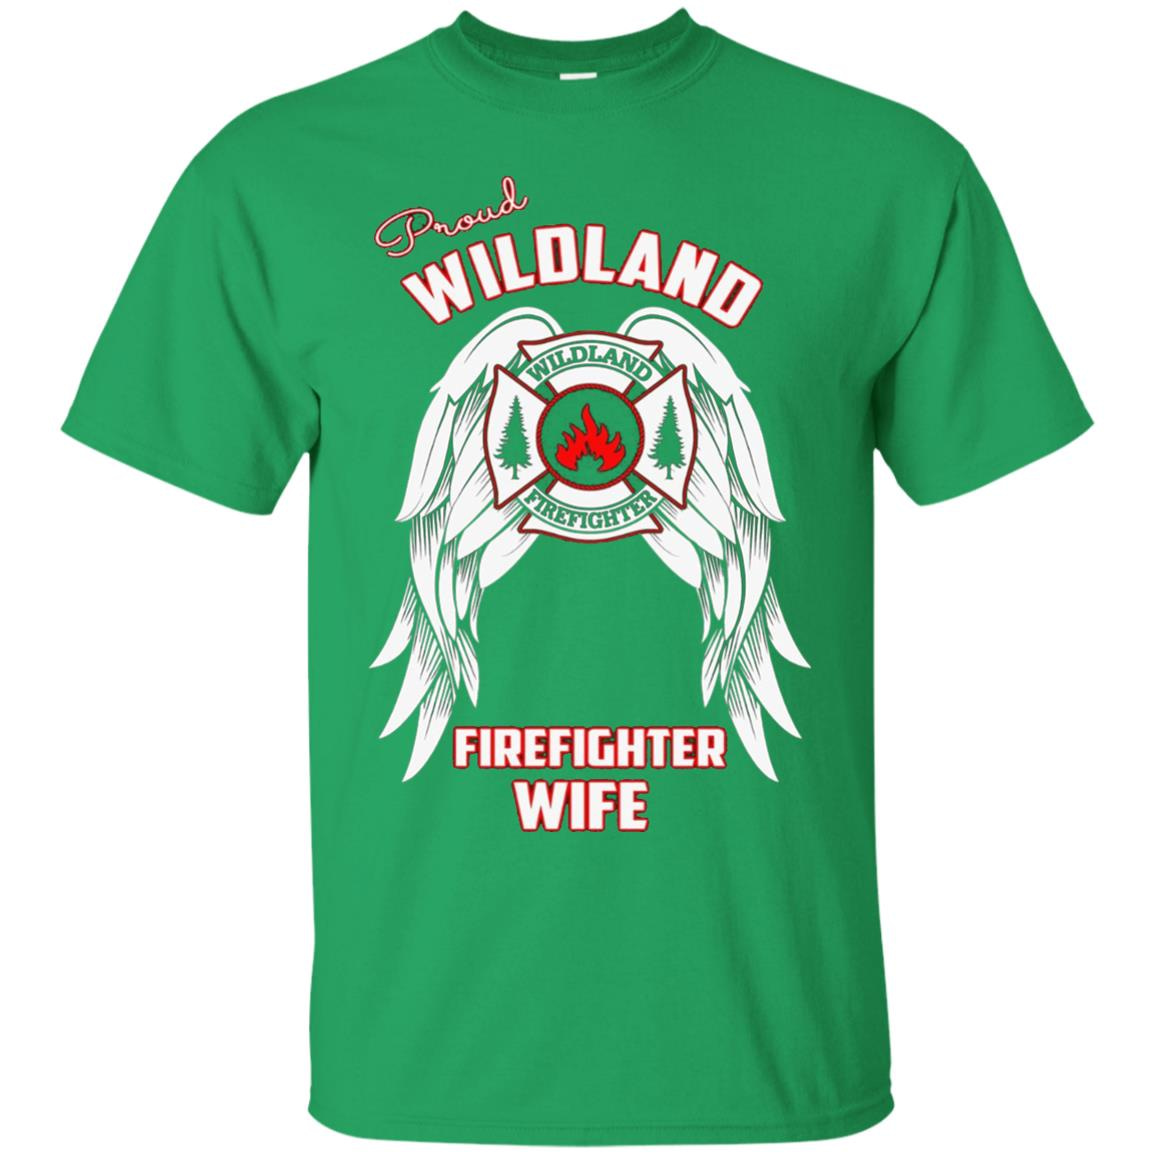 Inktee Store - Wildland Firefighter Wife Wings Thin Red Line Men’s T-Shirt Image